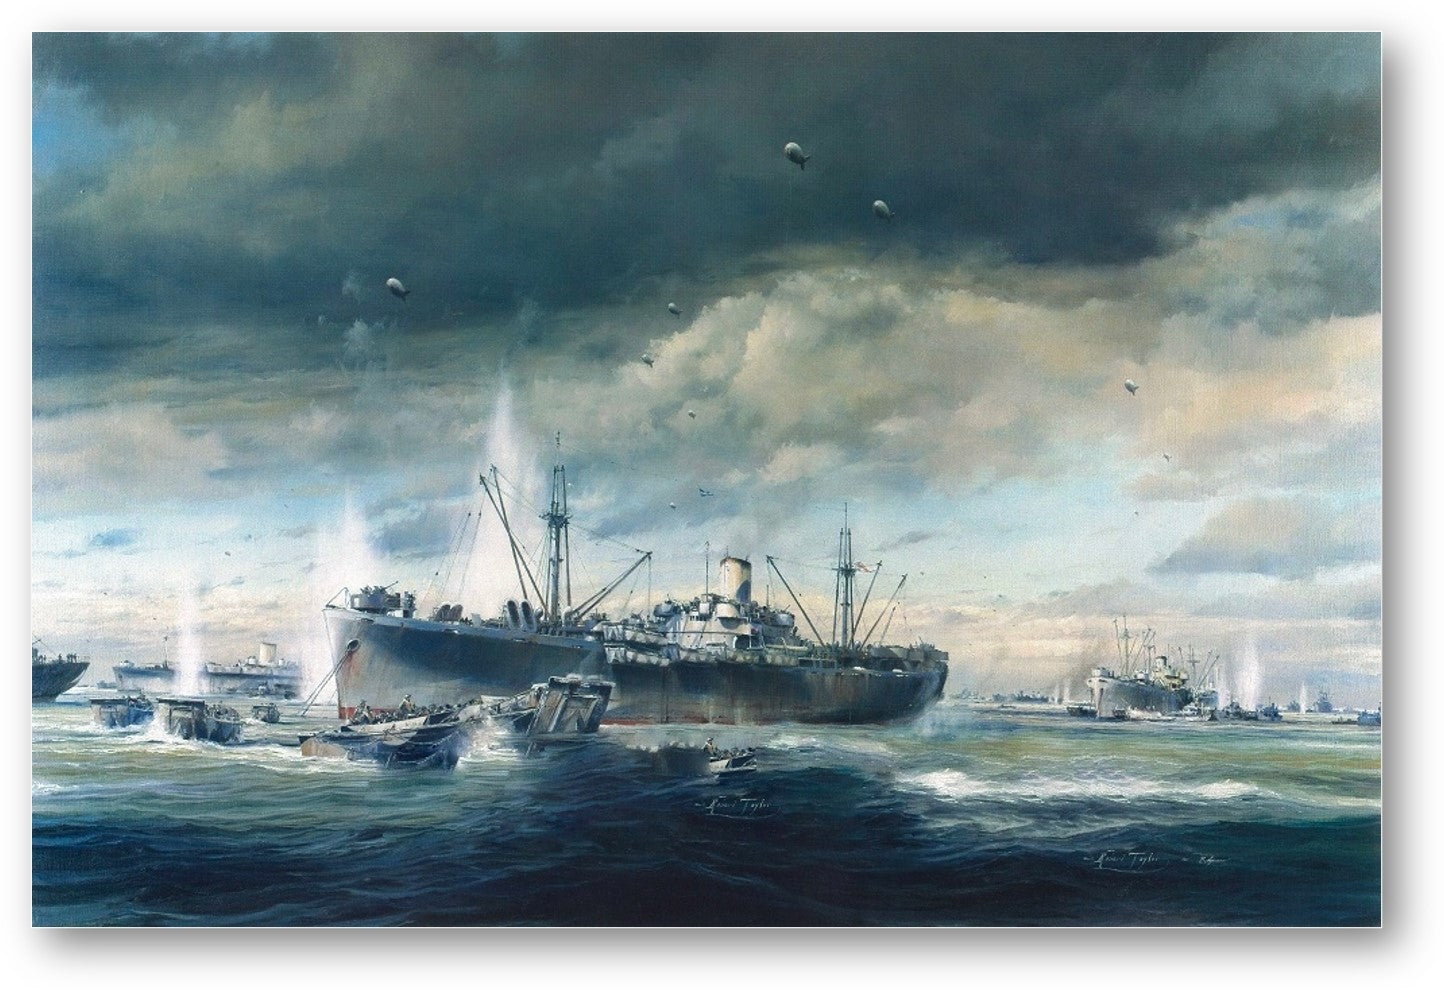 D Day Normandy Landings <br>by Robert Taylor